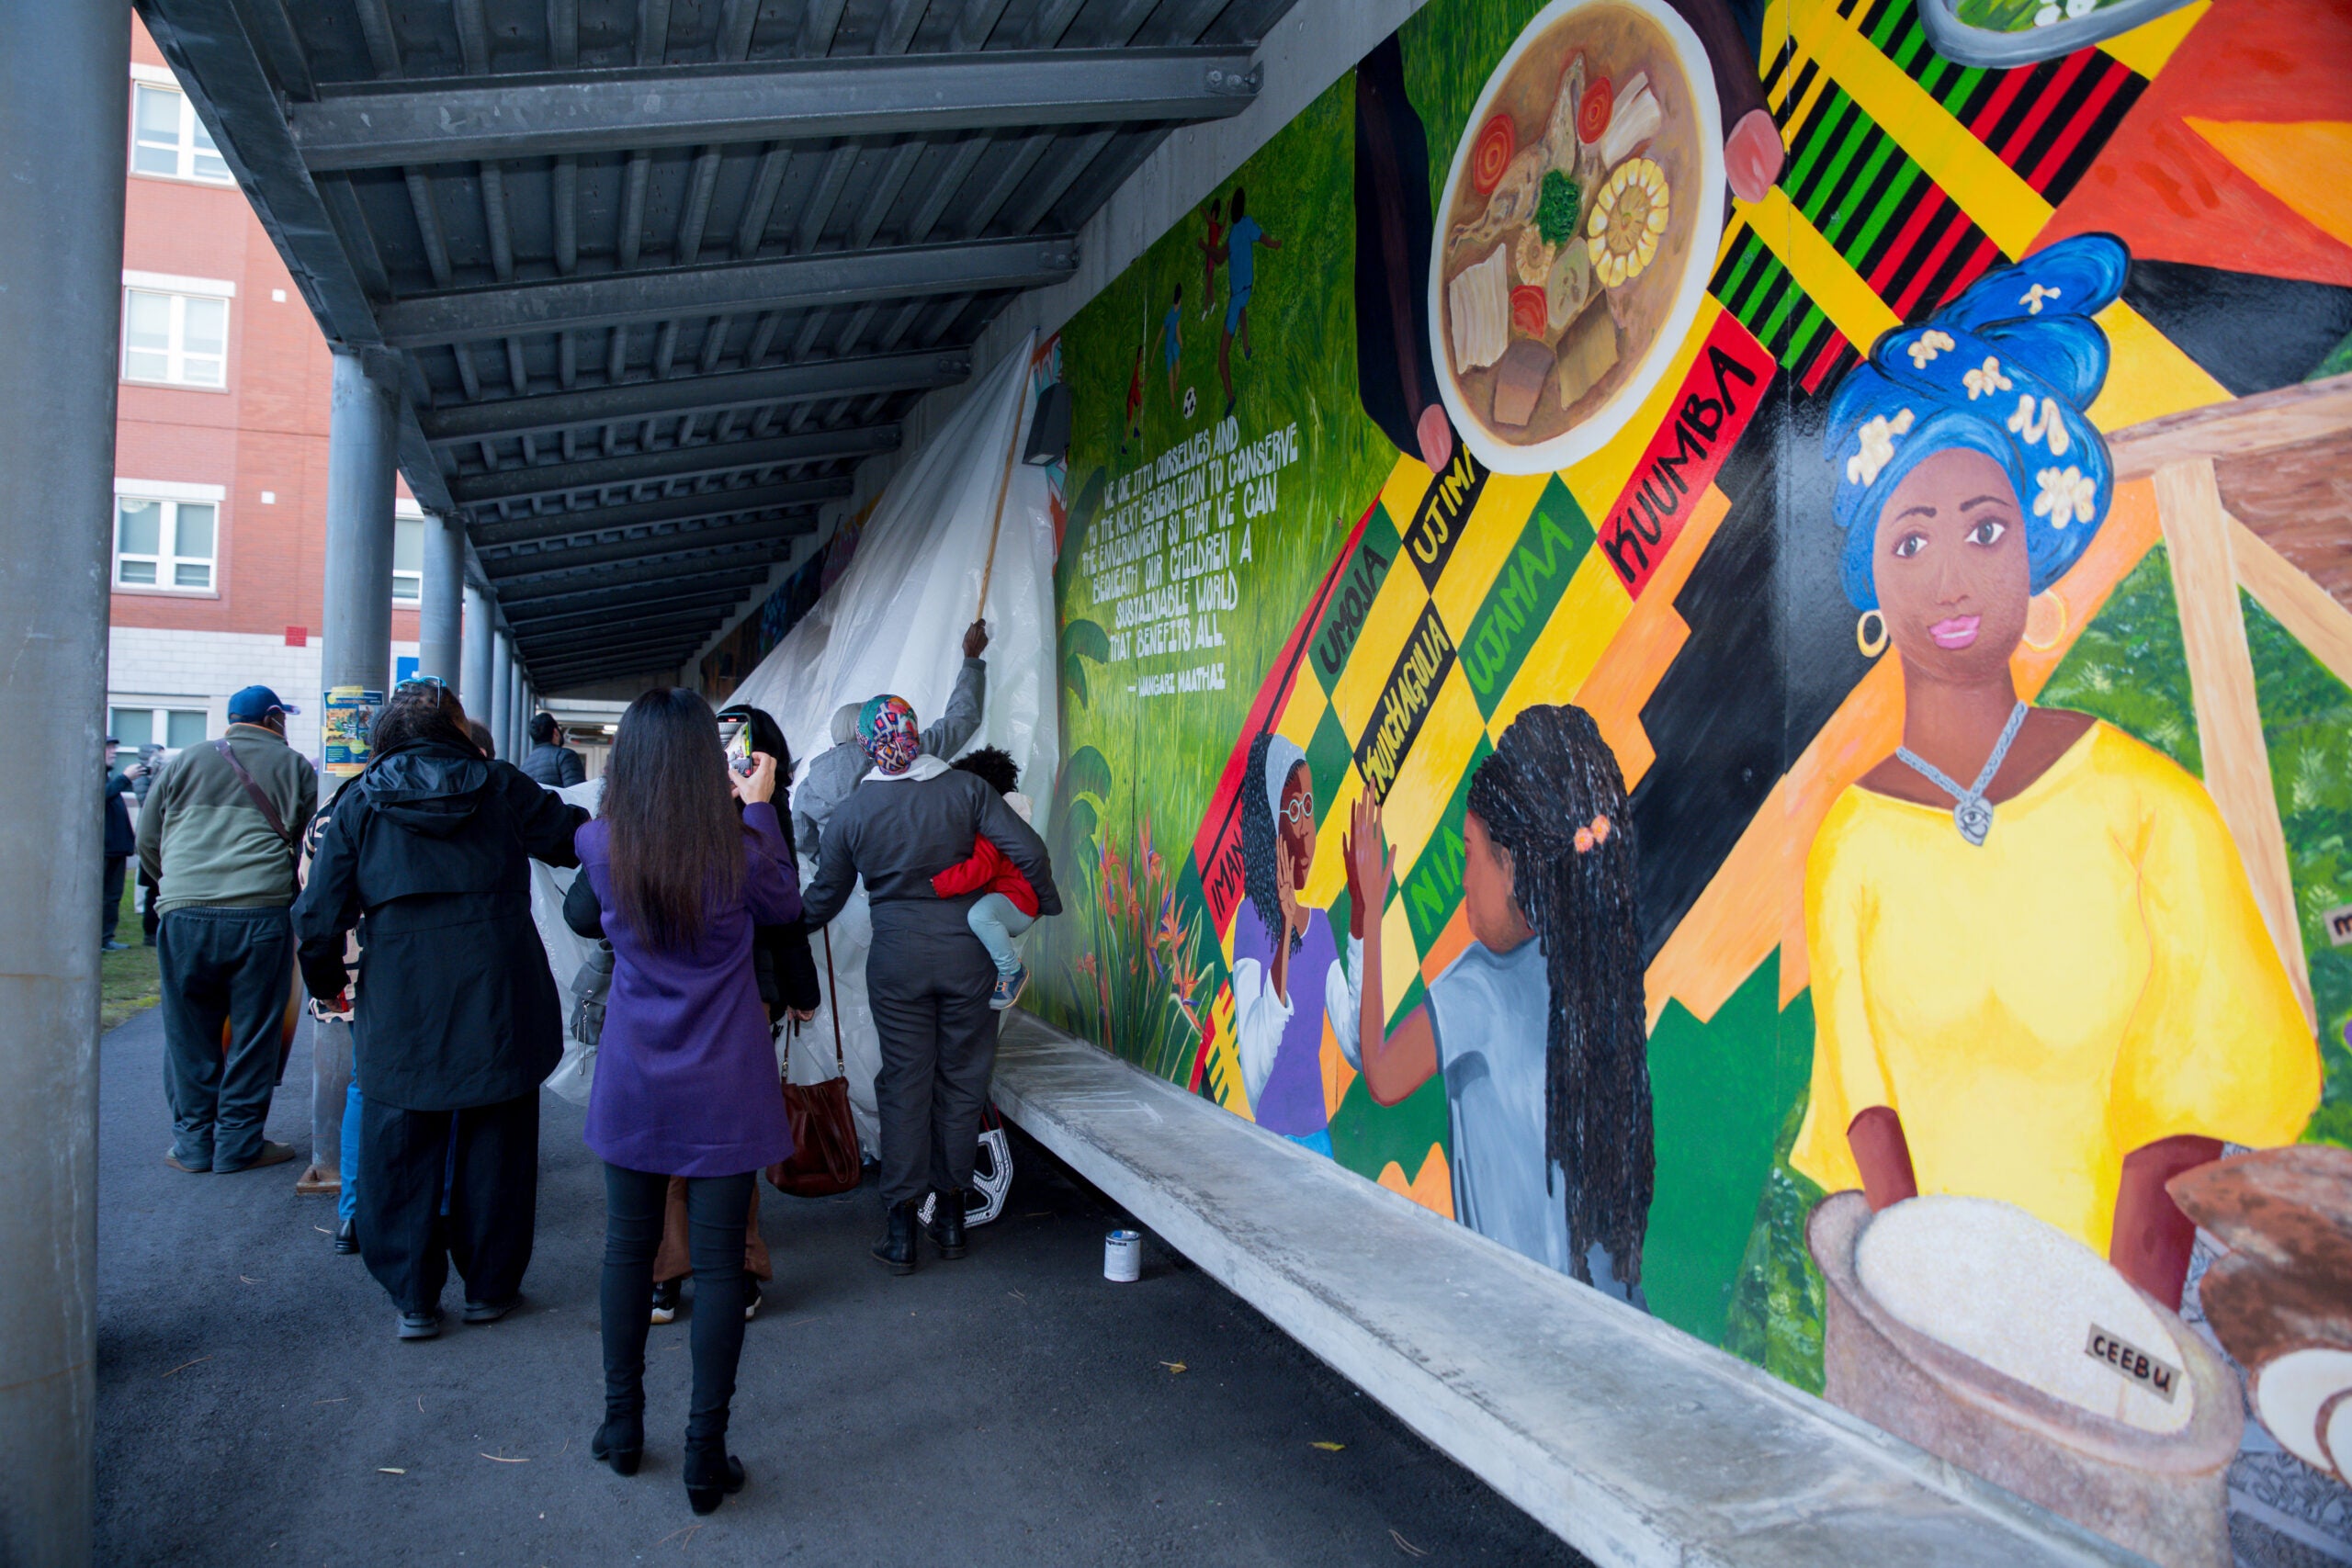 "An Ode to Africa in the Americas" mural at Roxbury Community College